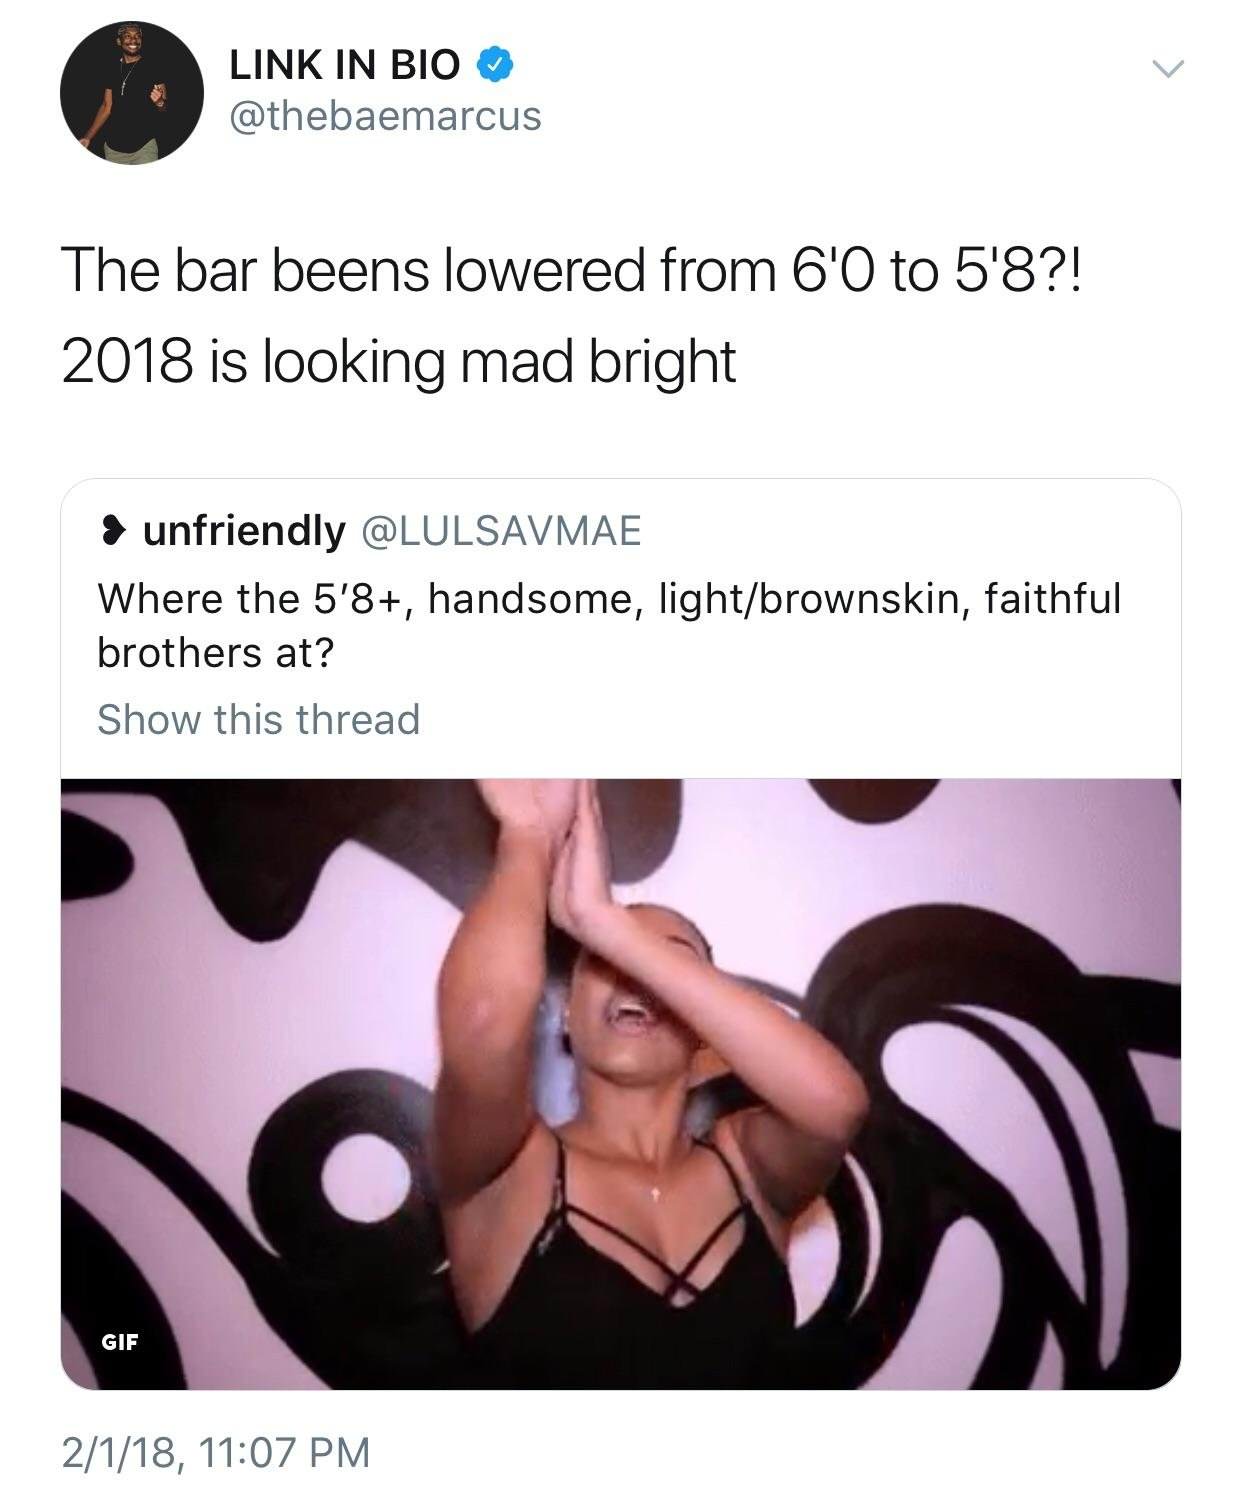 5 8 girl meme - Link In Bio The bar beens lowered from 6'0 to 5'8?! 2018 is looking mad bright > unfriendly Where the 5'8, handsome, lightbrownskin, faithful brothers at? Show this thread Gif 2118,